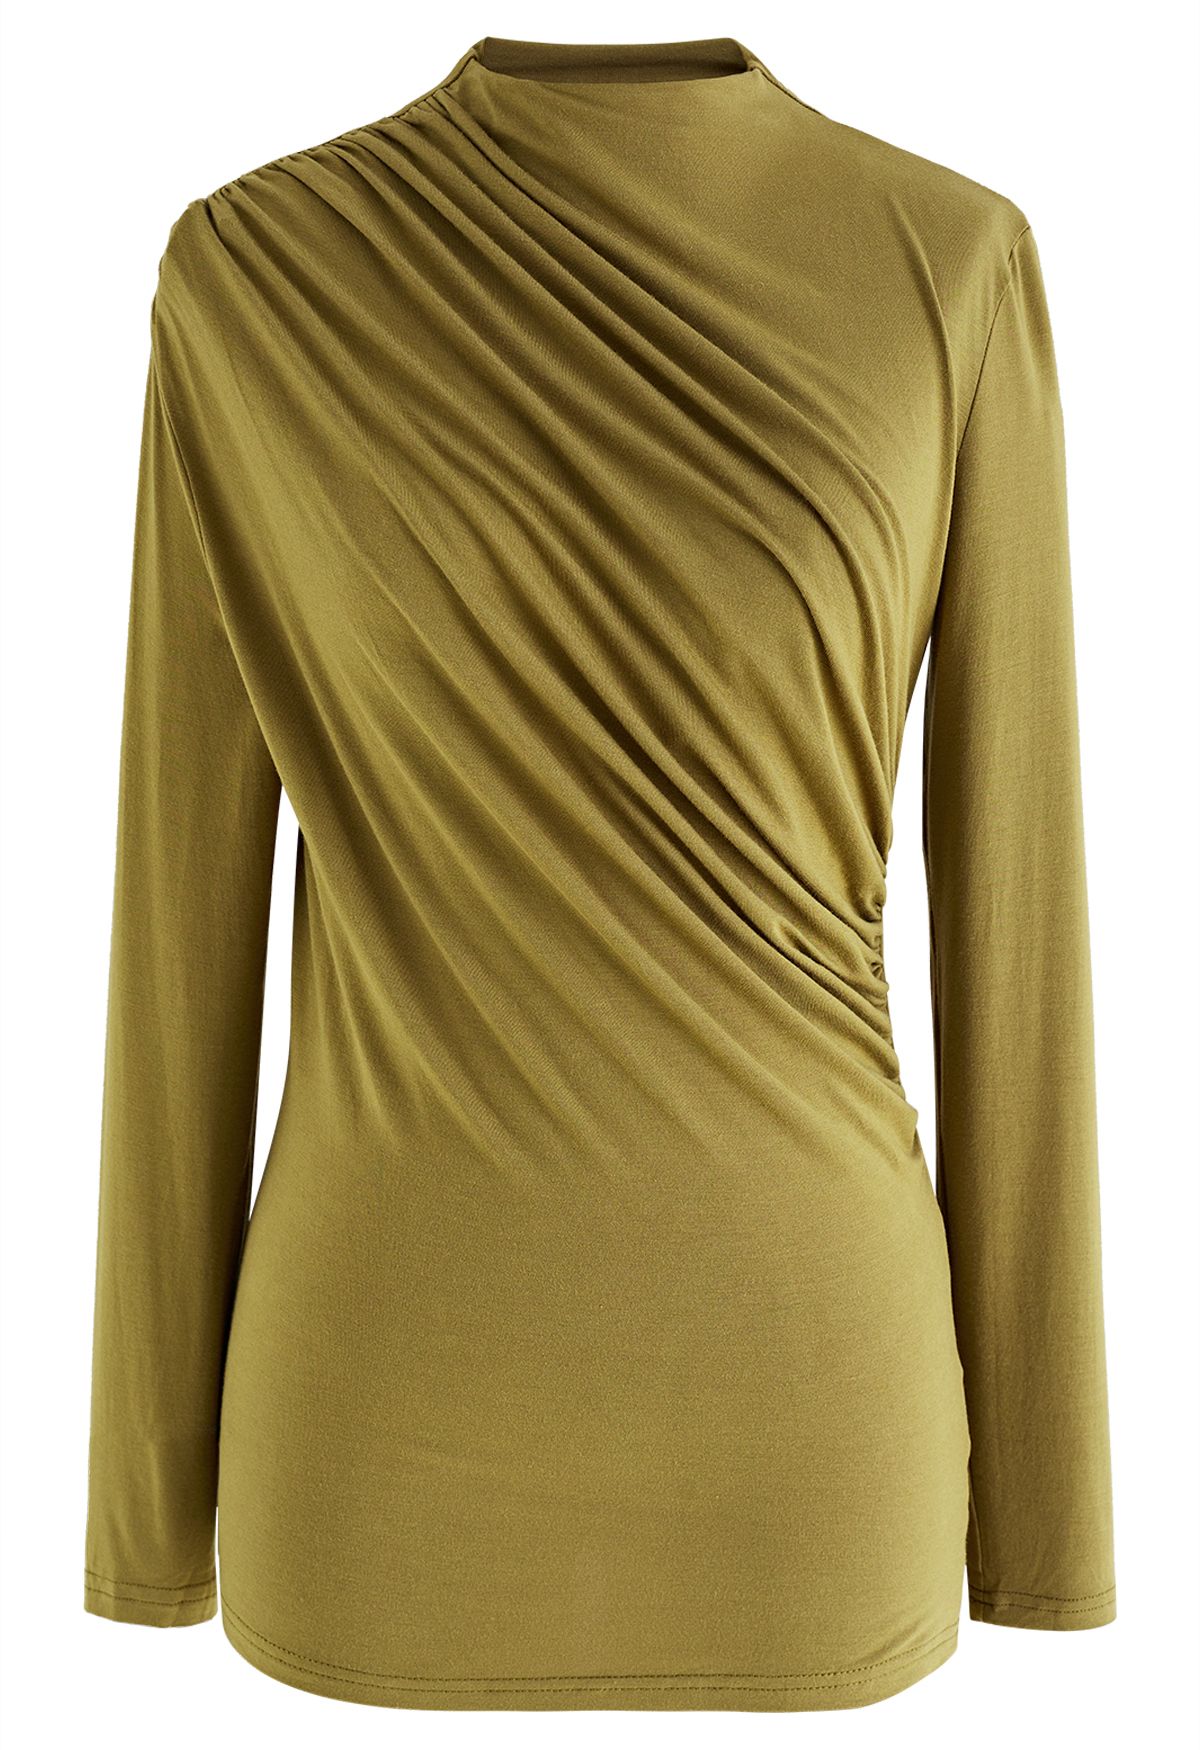 Ruched Long Sleeves Top in Olive - Retro, Indie and Unique Fashion